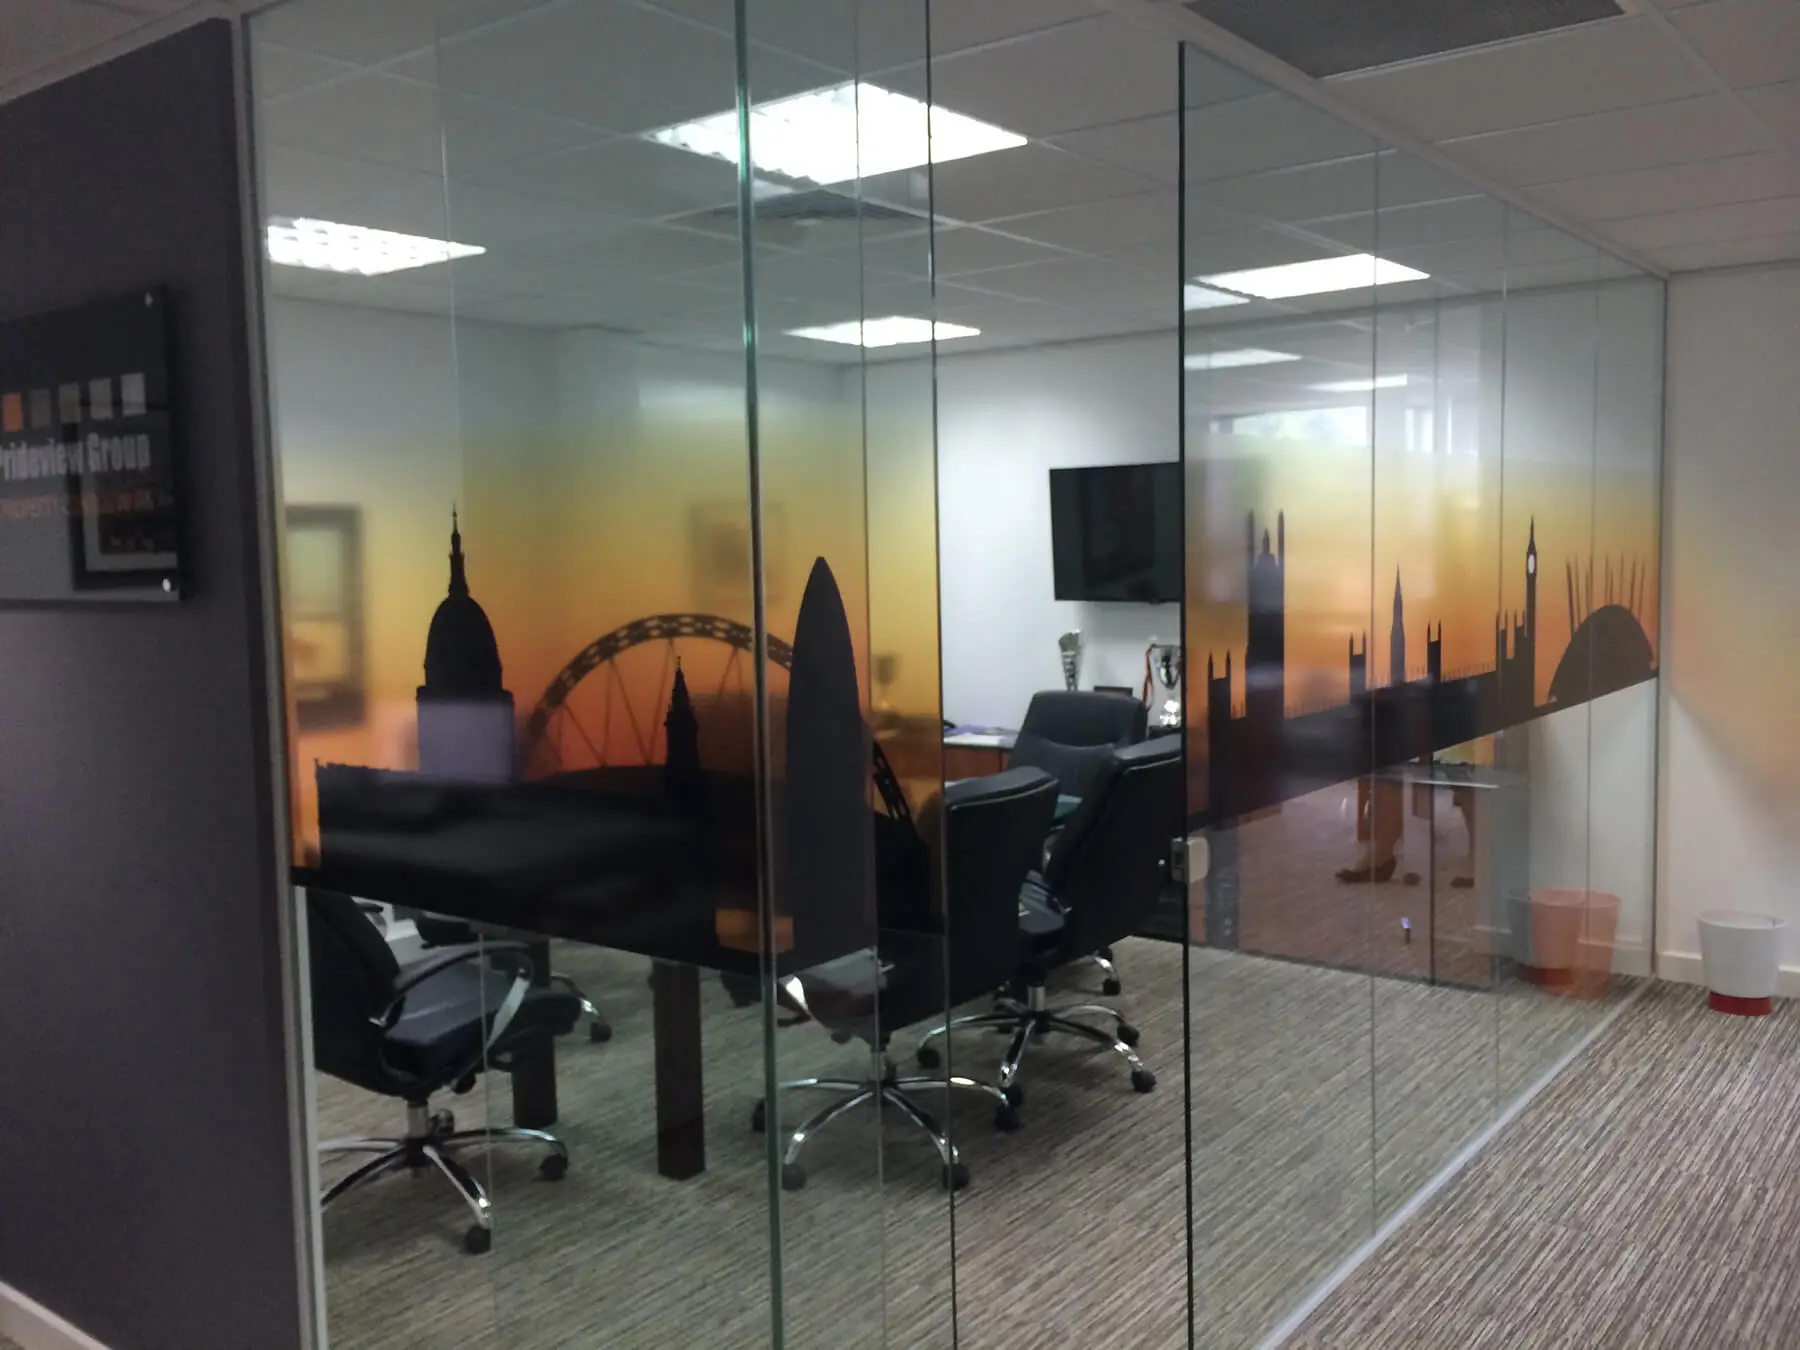 Meeting space with single glazed glass partitions inside of the office